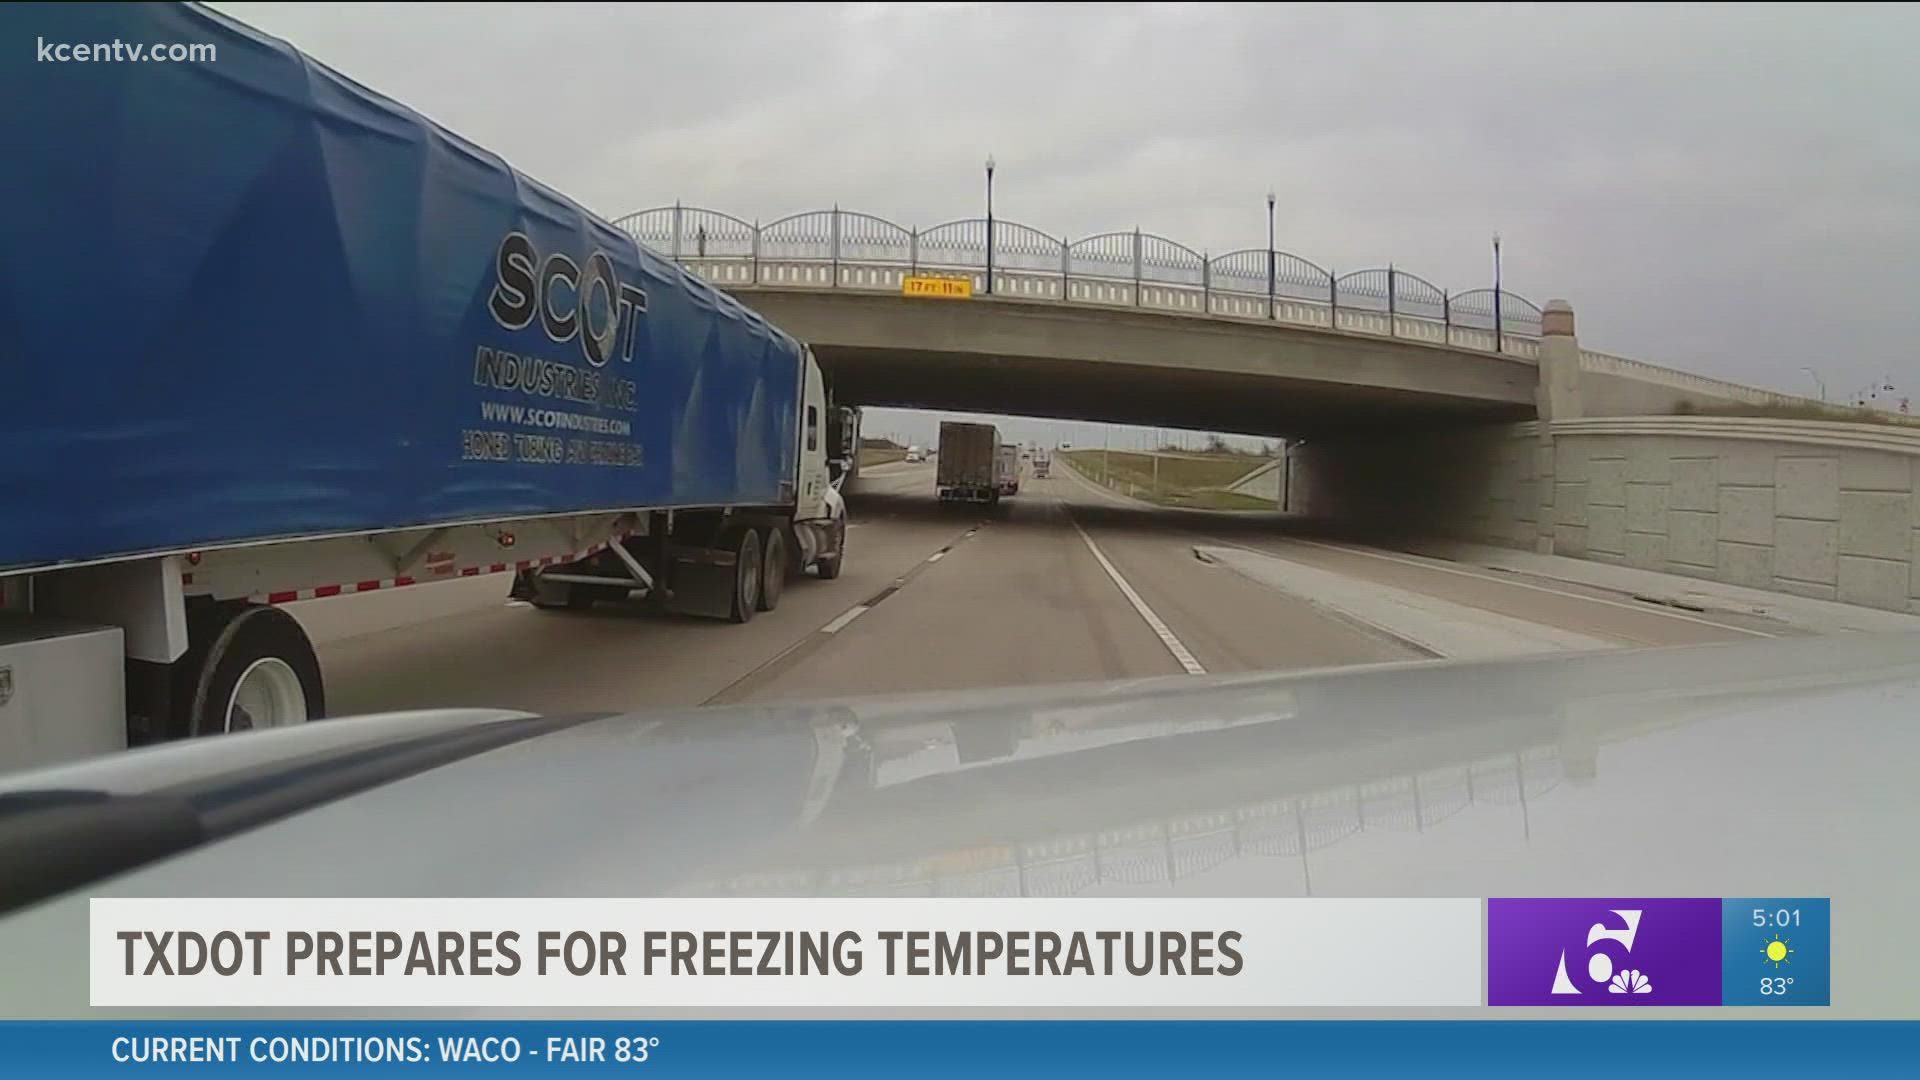 TxDOT crews will lay down brine on major highways in advance of the freezing temperatures expected over the weekend.